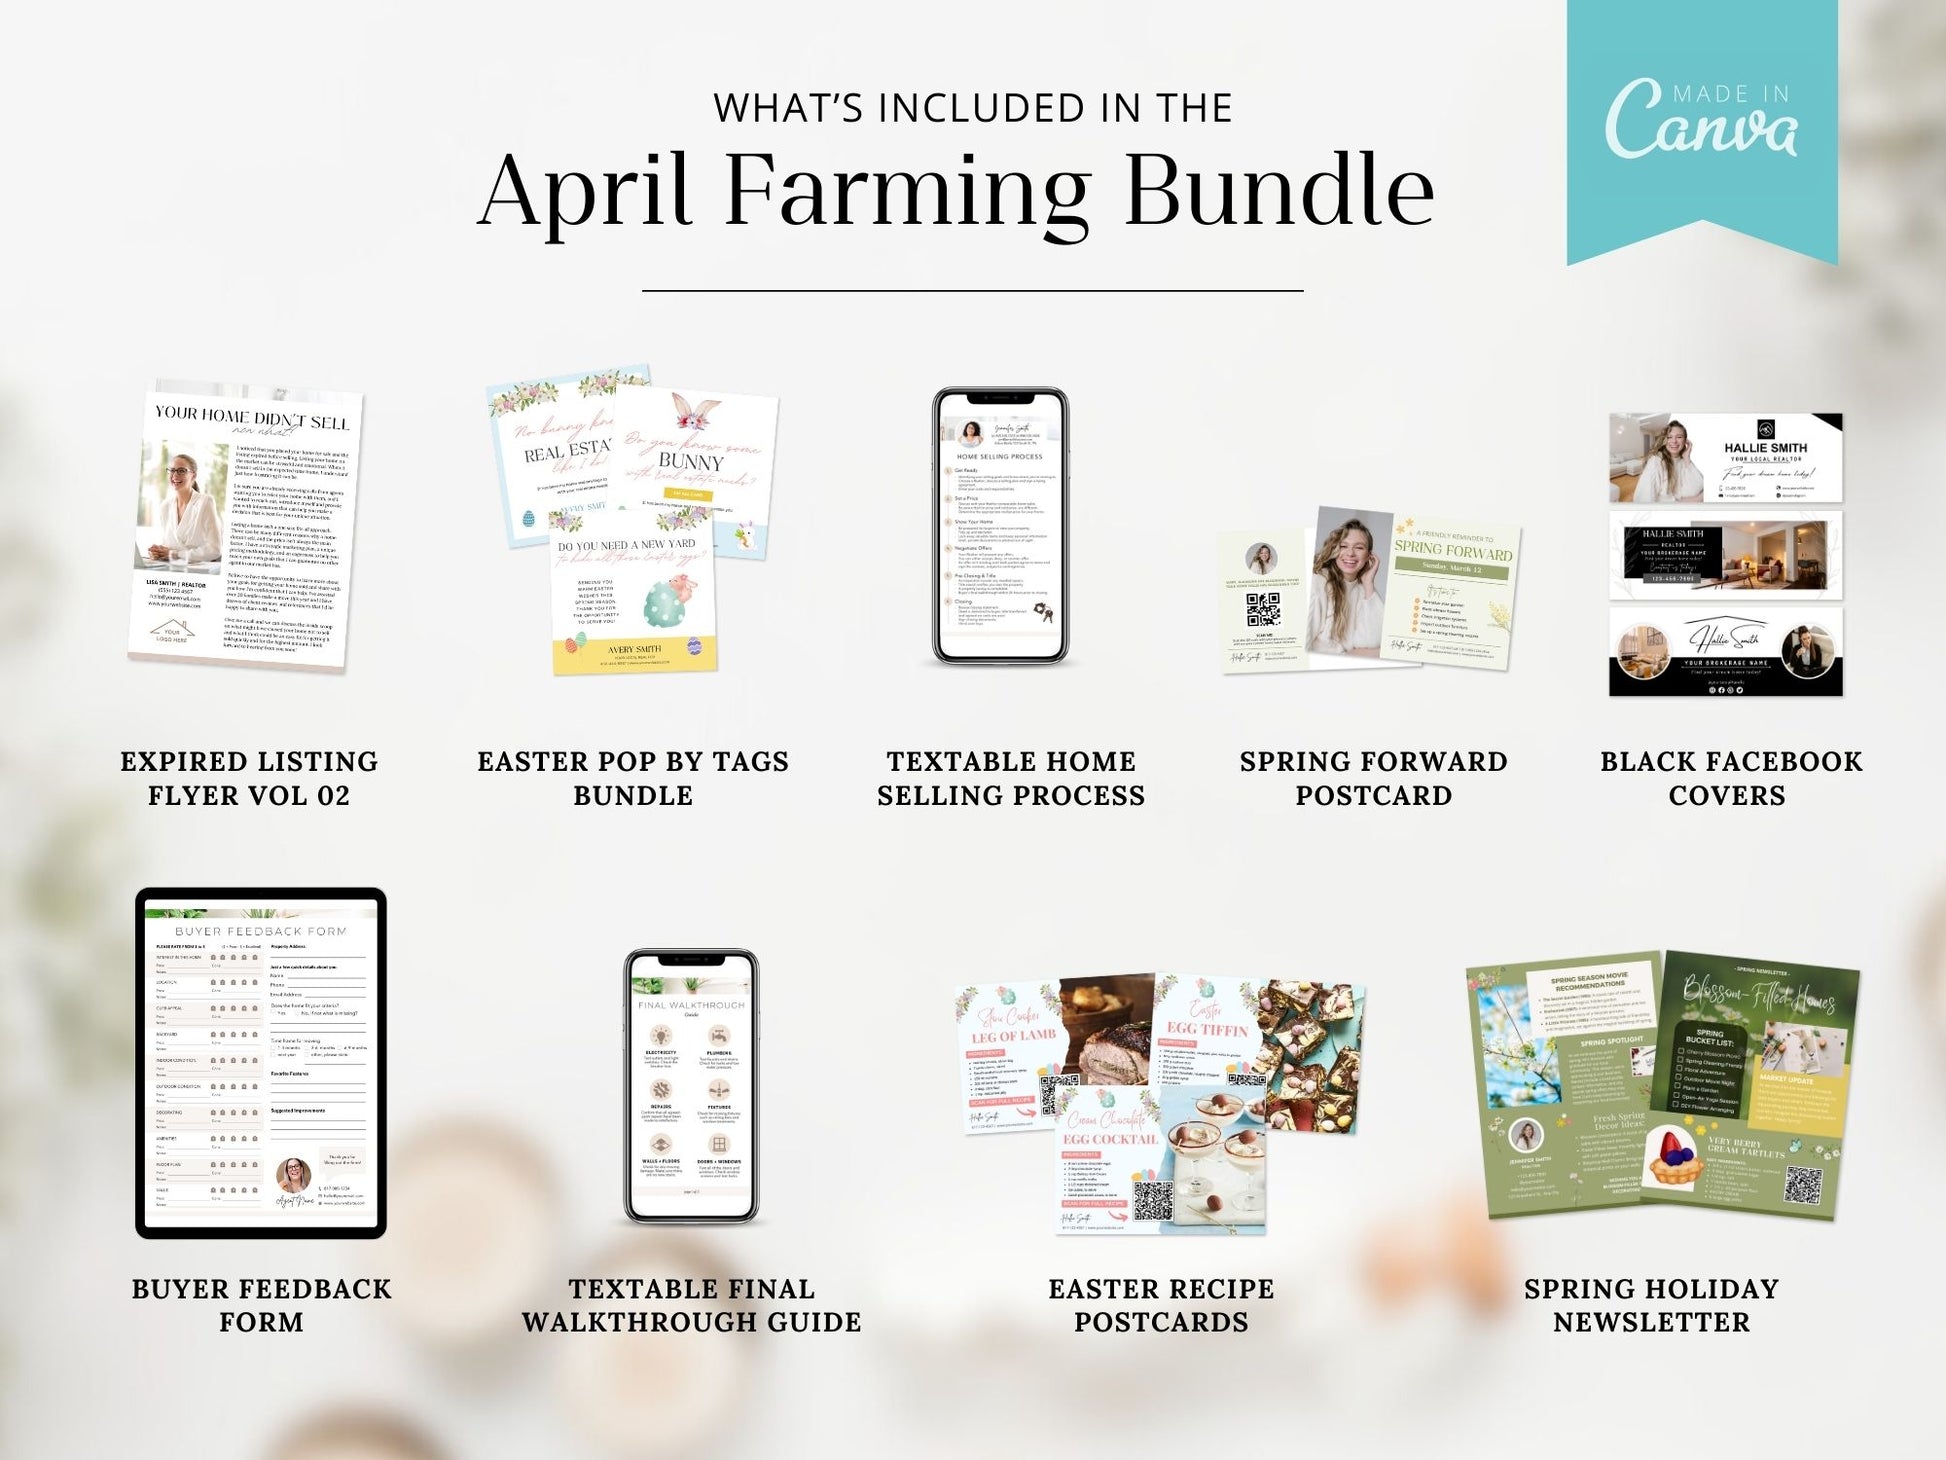 April Farming Bundle - Essential tools and resources for real estate farming in April.